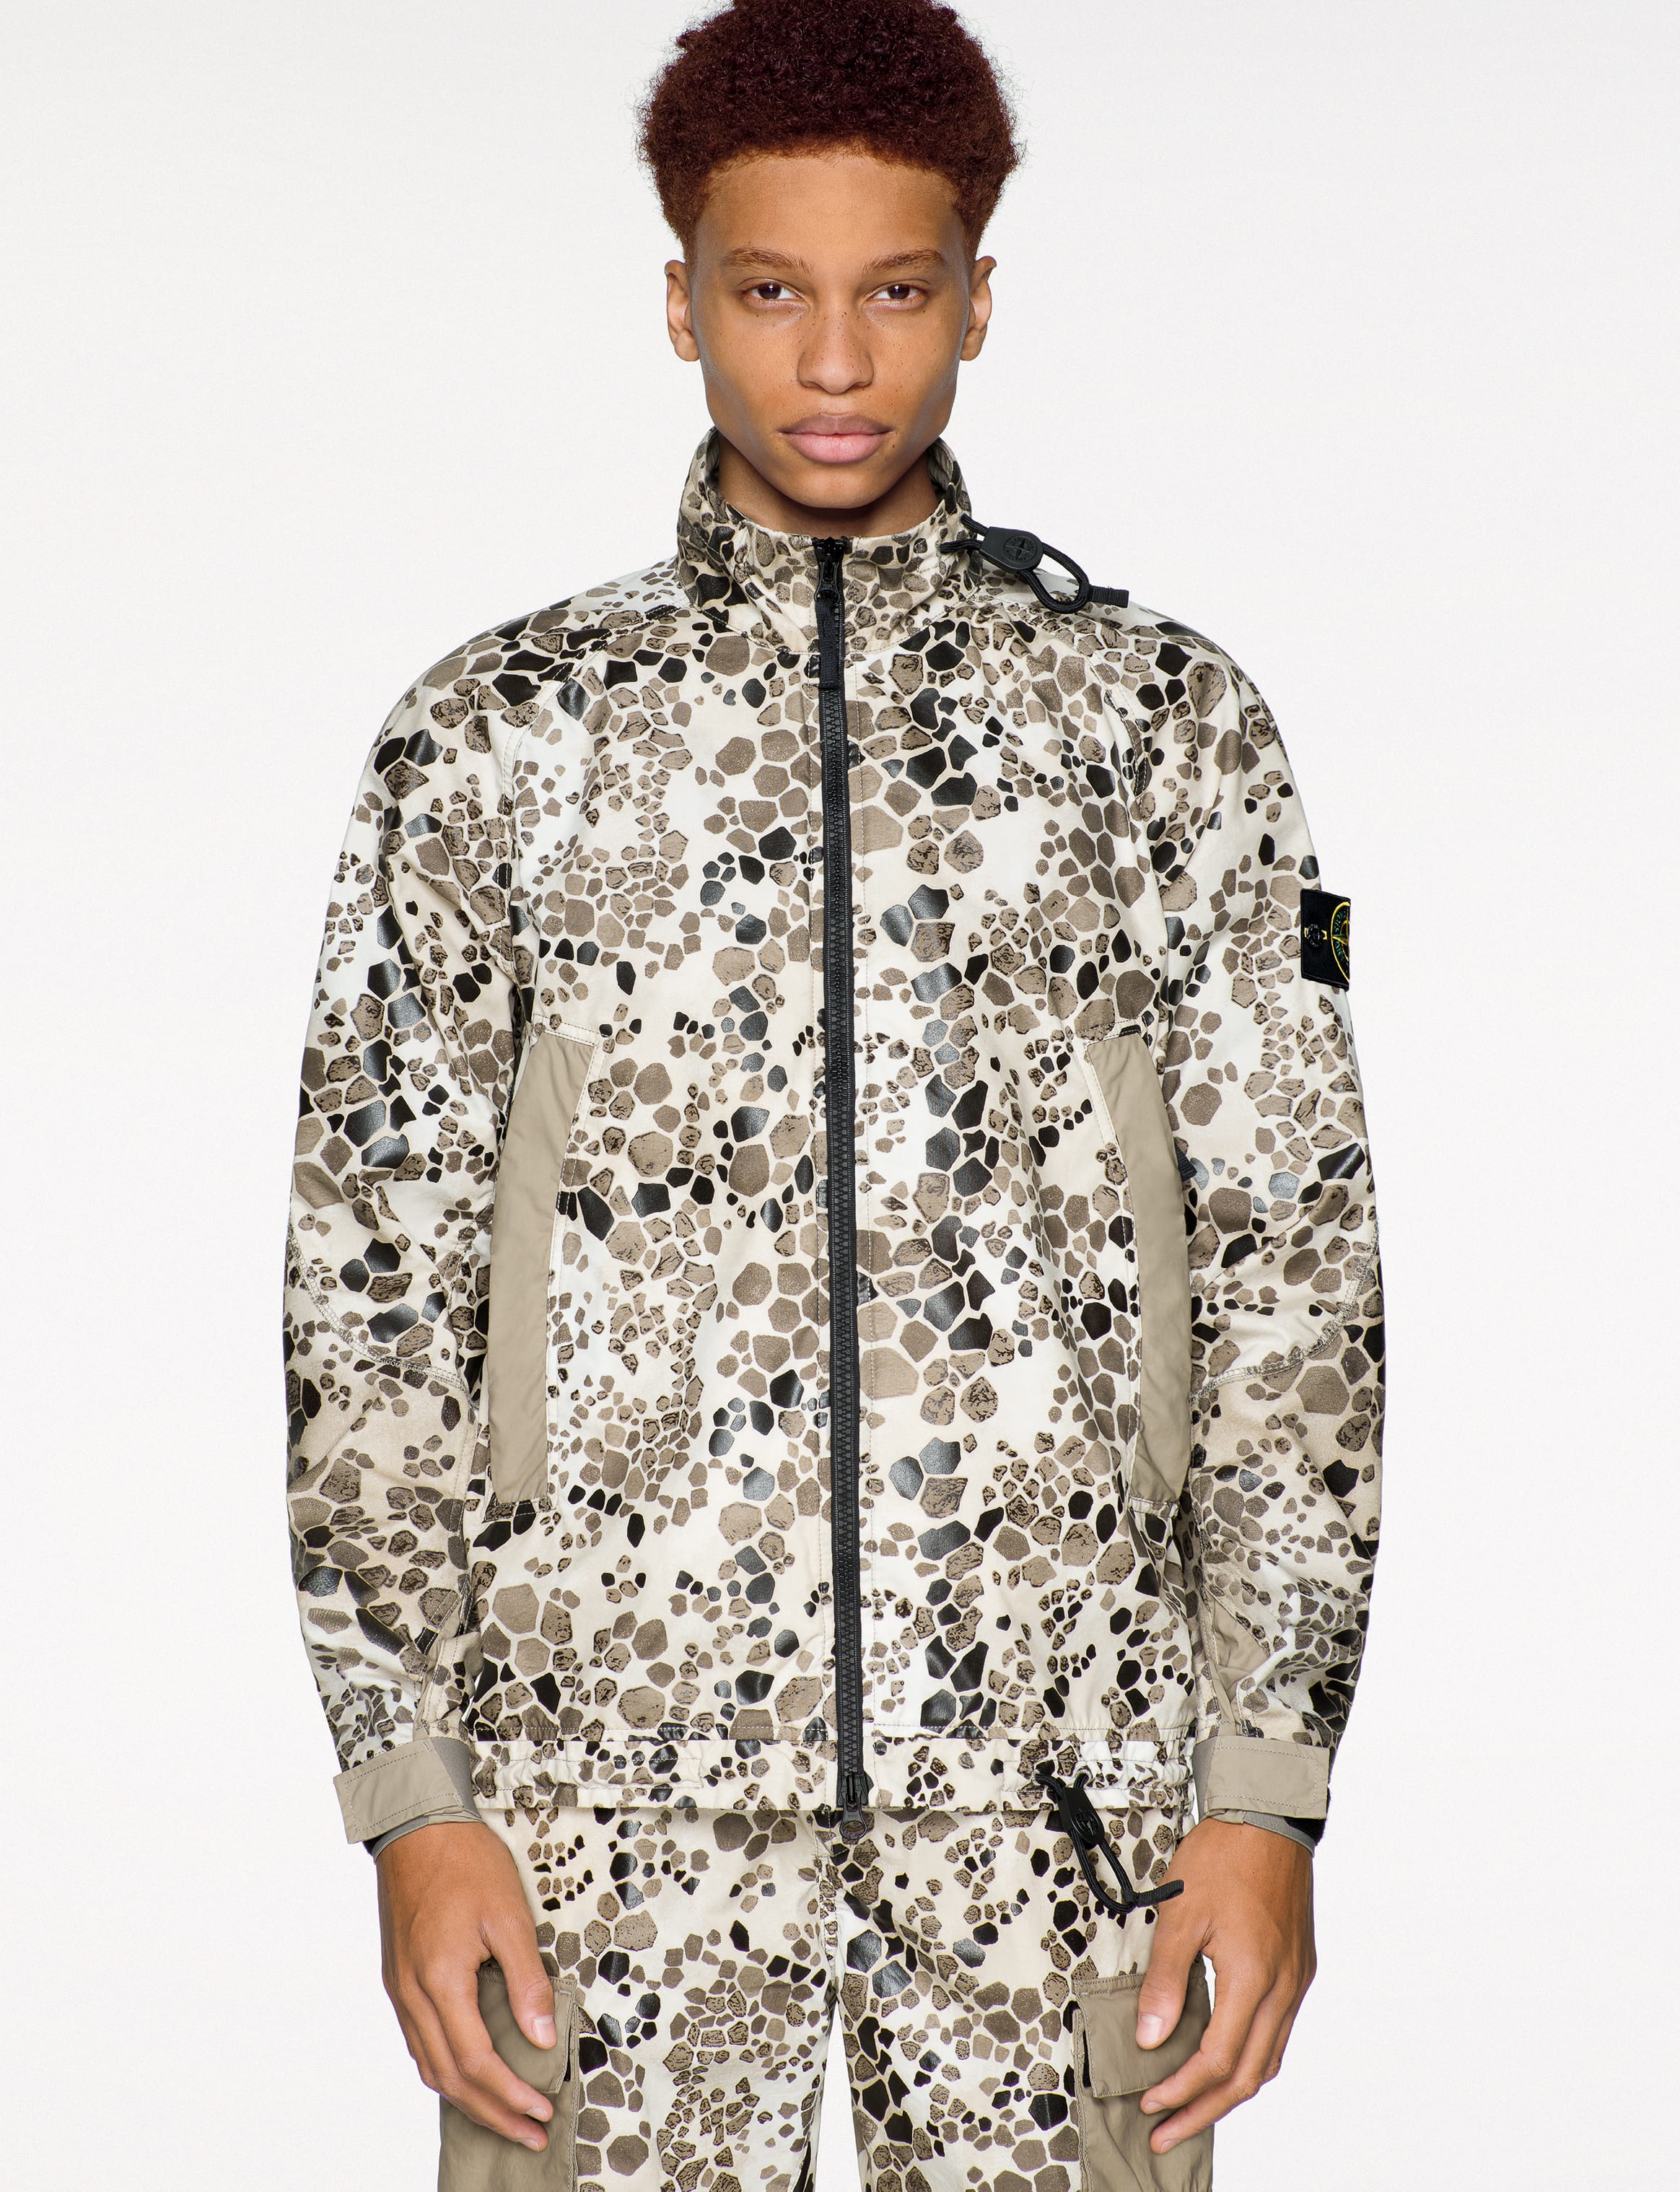 Army Uniform or Alligator? Stone Island drops an inspired jacket collection